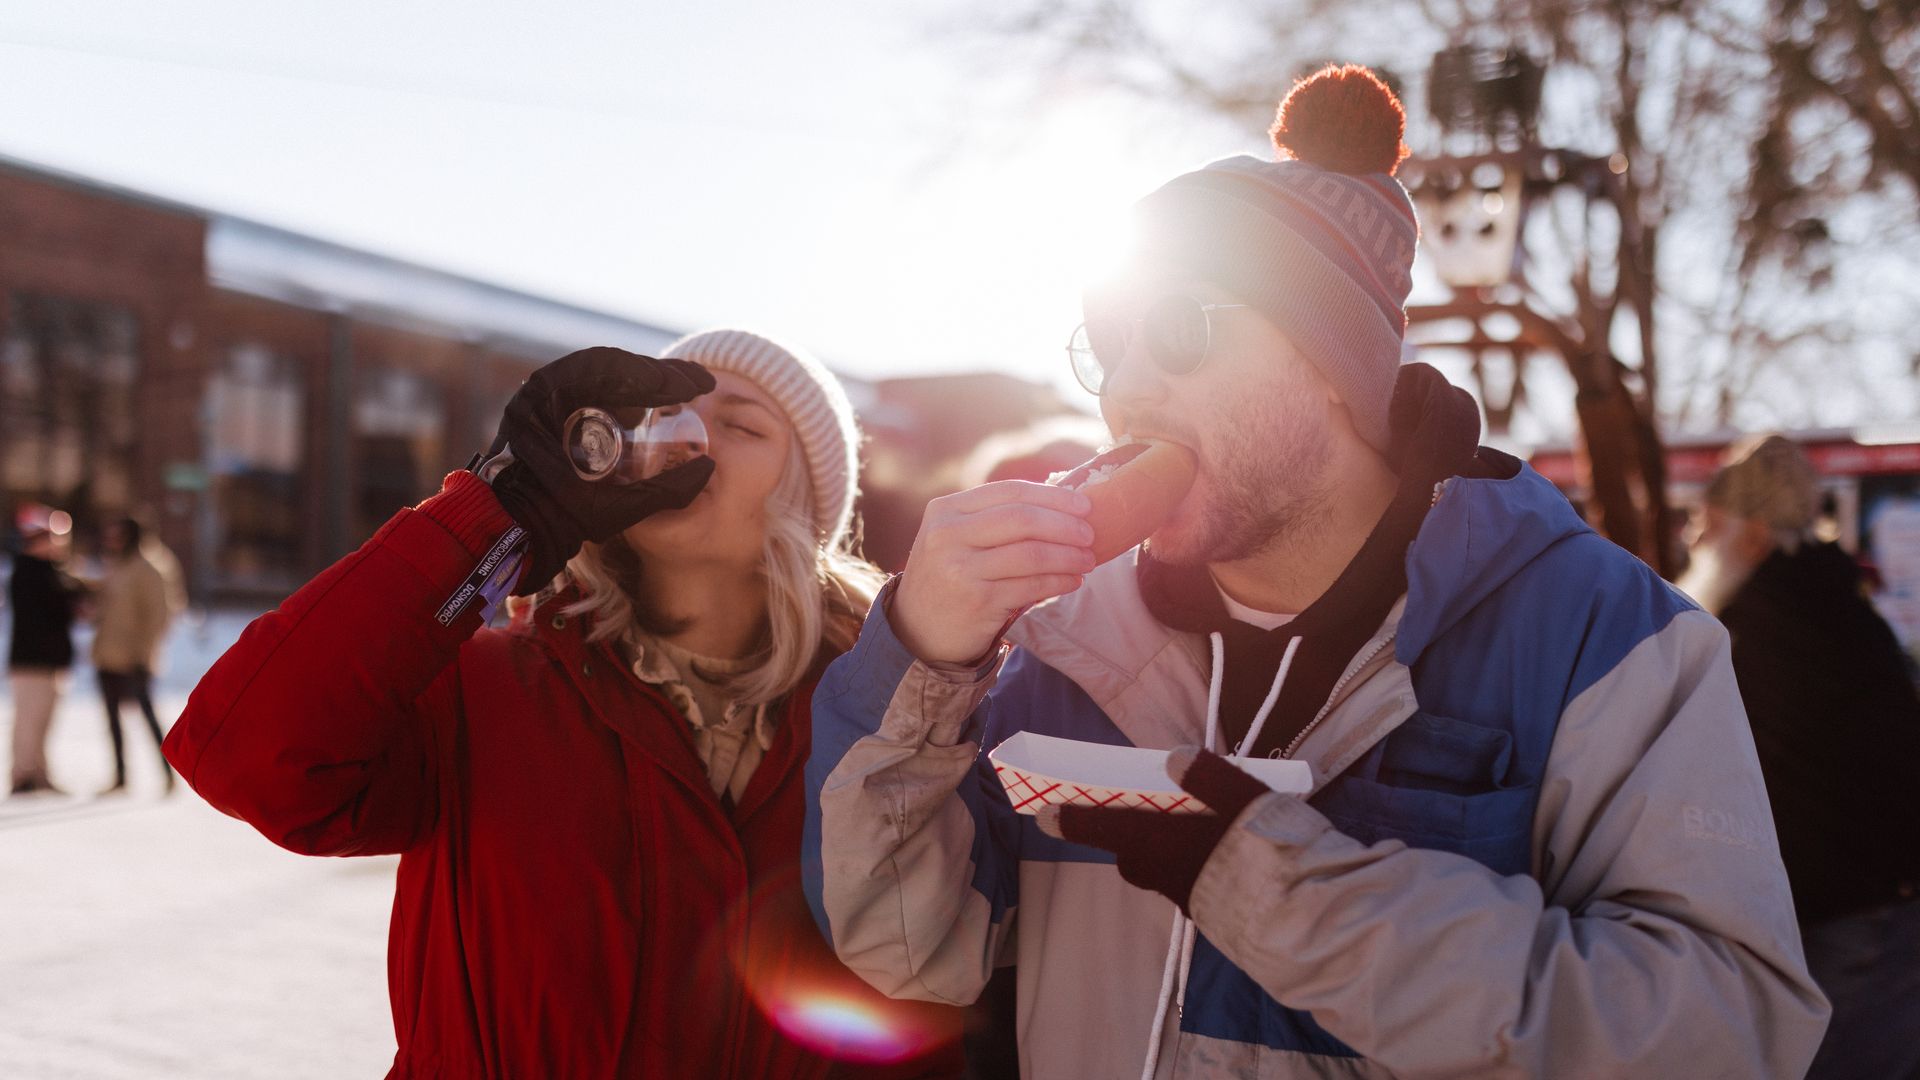 A woman drinking beer and a man eating a hot dog on a sunny winter day at the Minnesota State Fairgrounds.